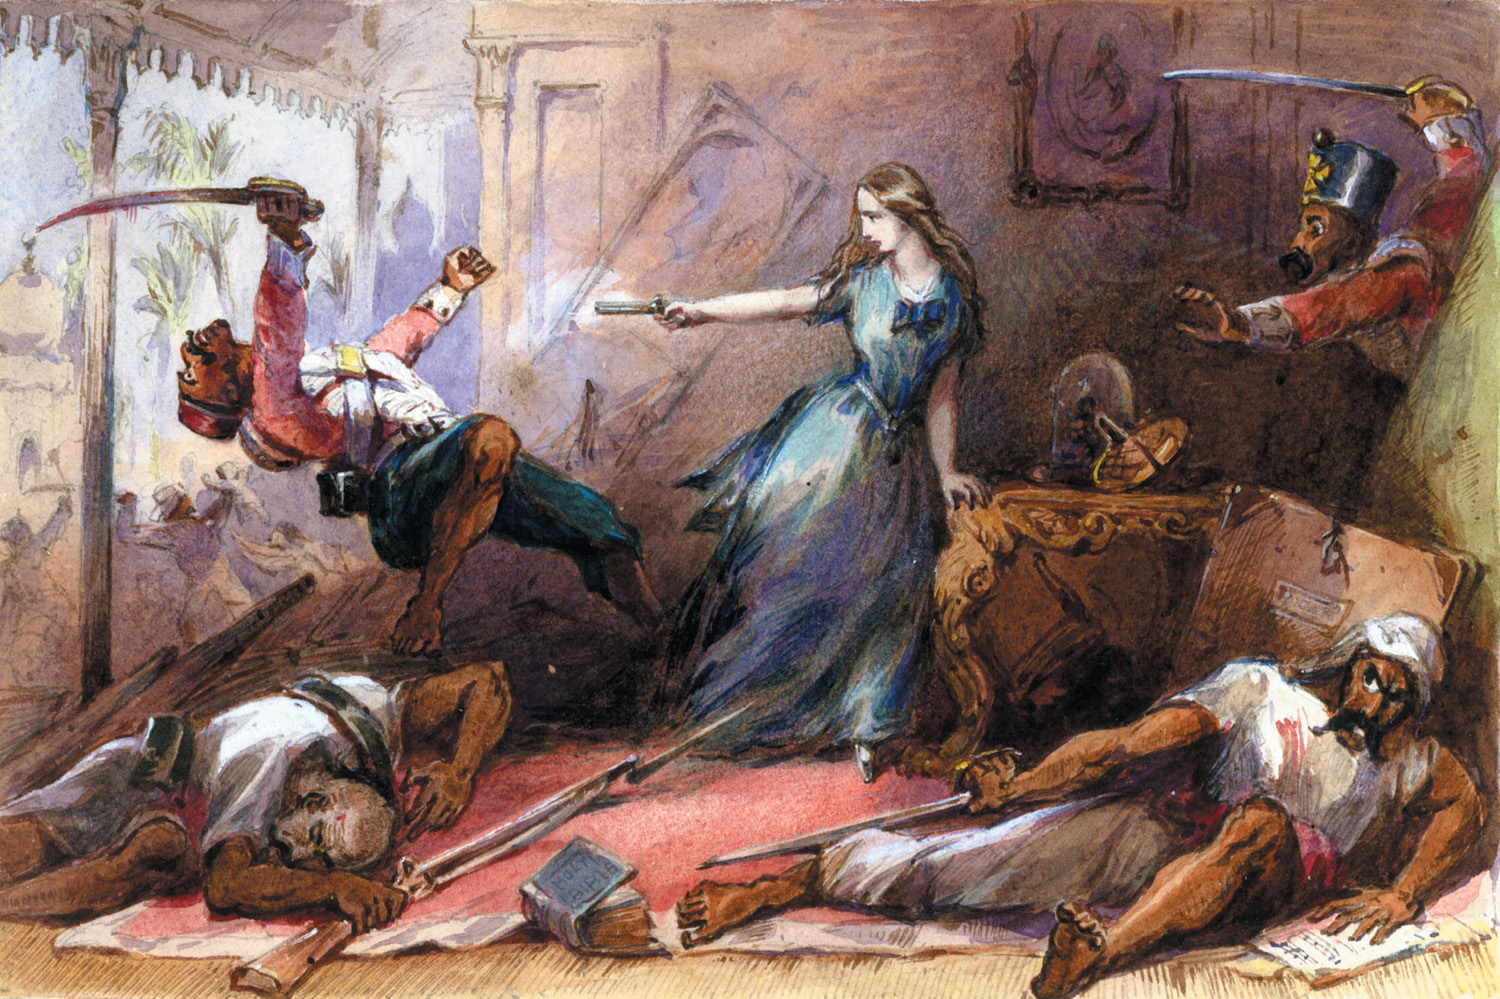 In one of many images created to depict English heroism during the rebellion, General Hugh Wheeler's wife defends herself against attacking sepoys at Cawnpore.